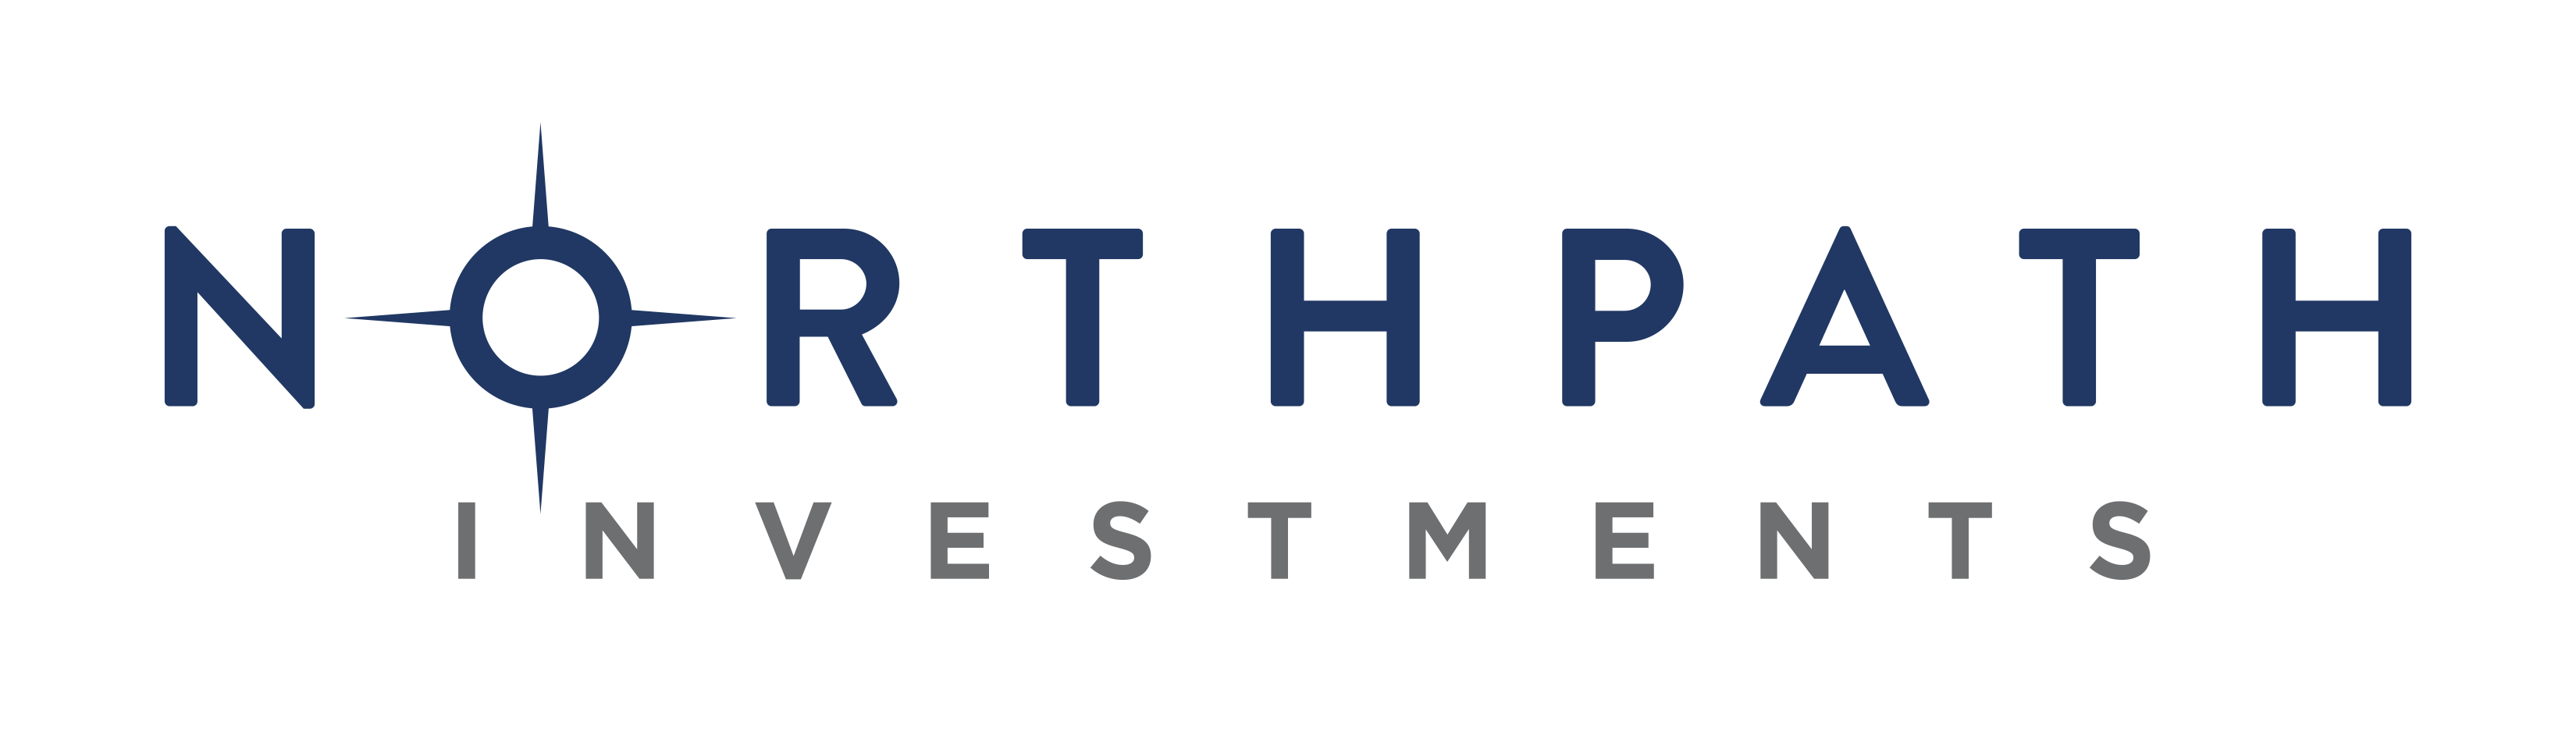 Northpath-logo-final-reverse.png